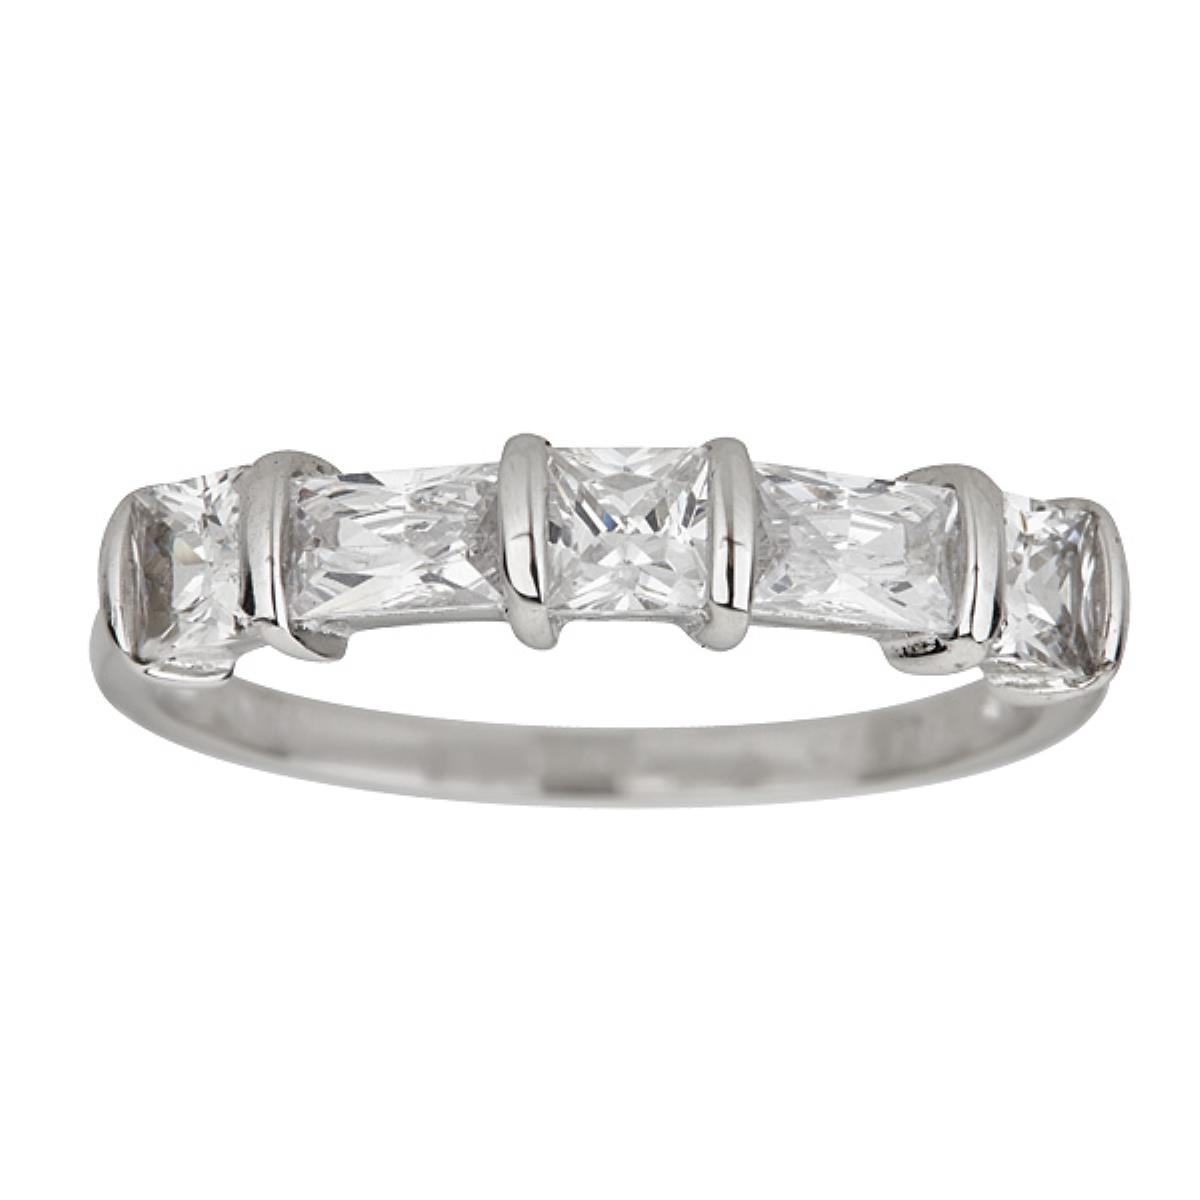 Sterling Silver Baguette & Princess Cut 5 Stone  3.5mm Anniversary Ring